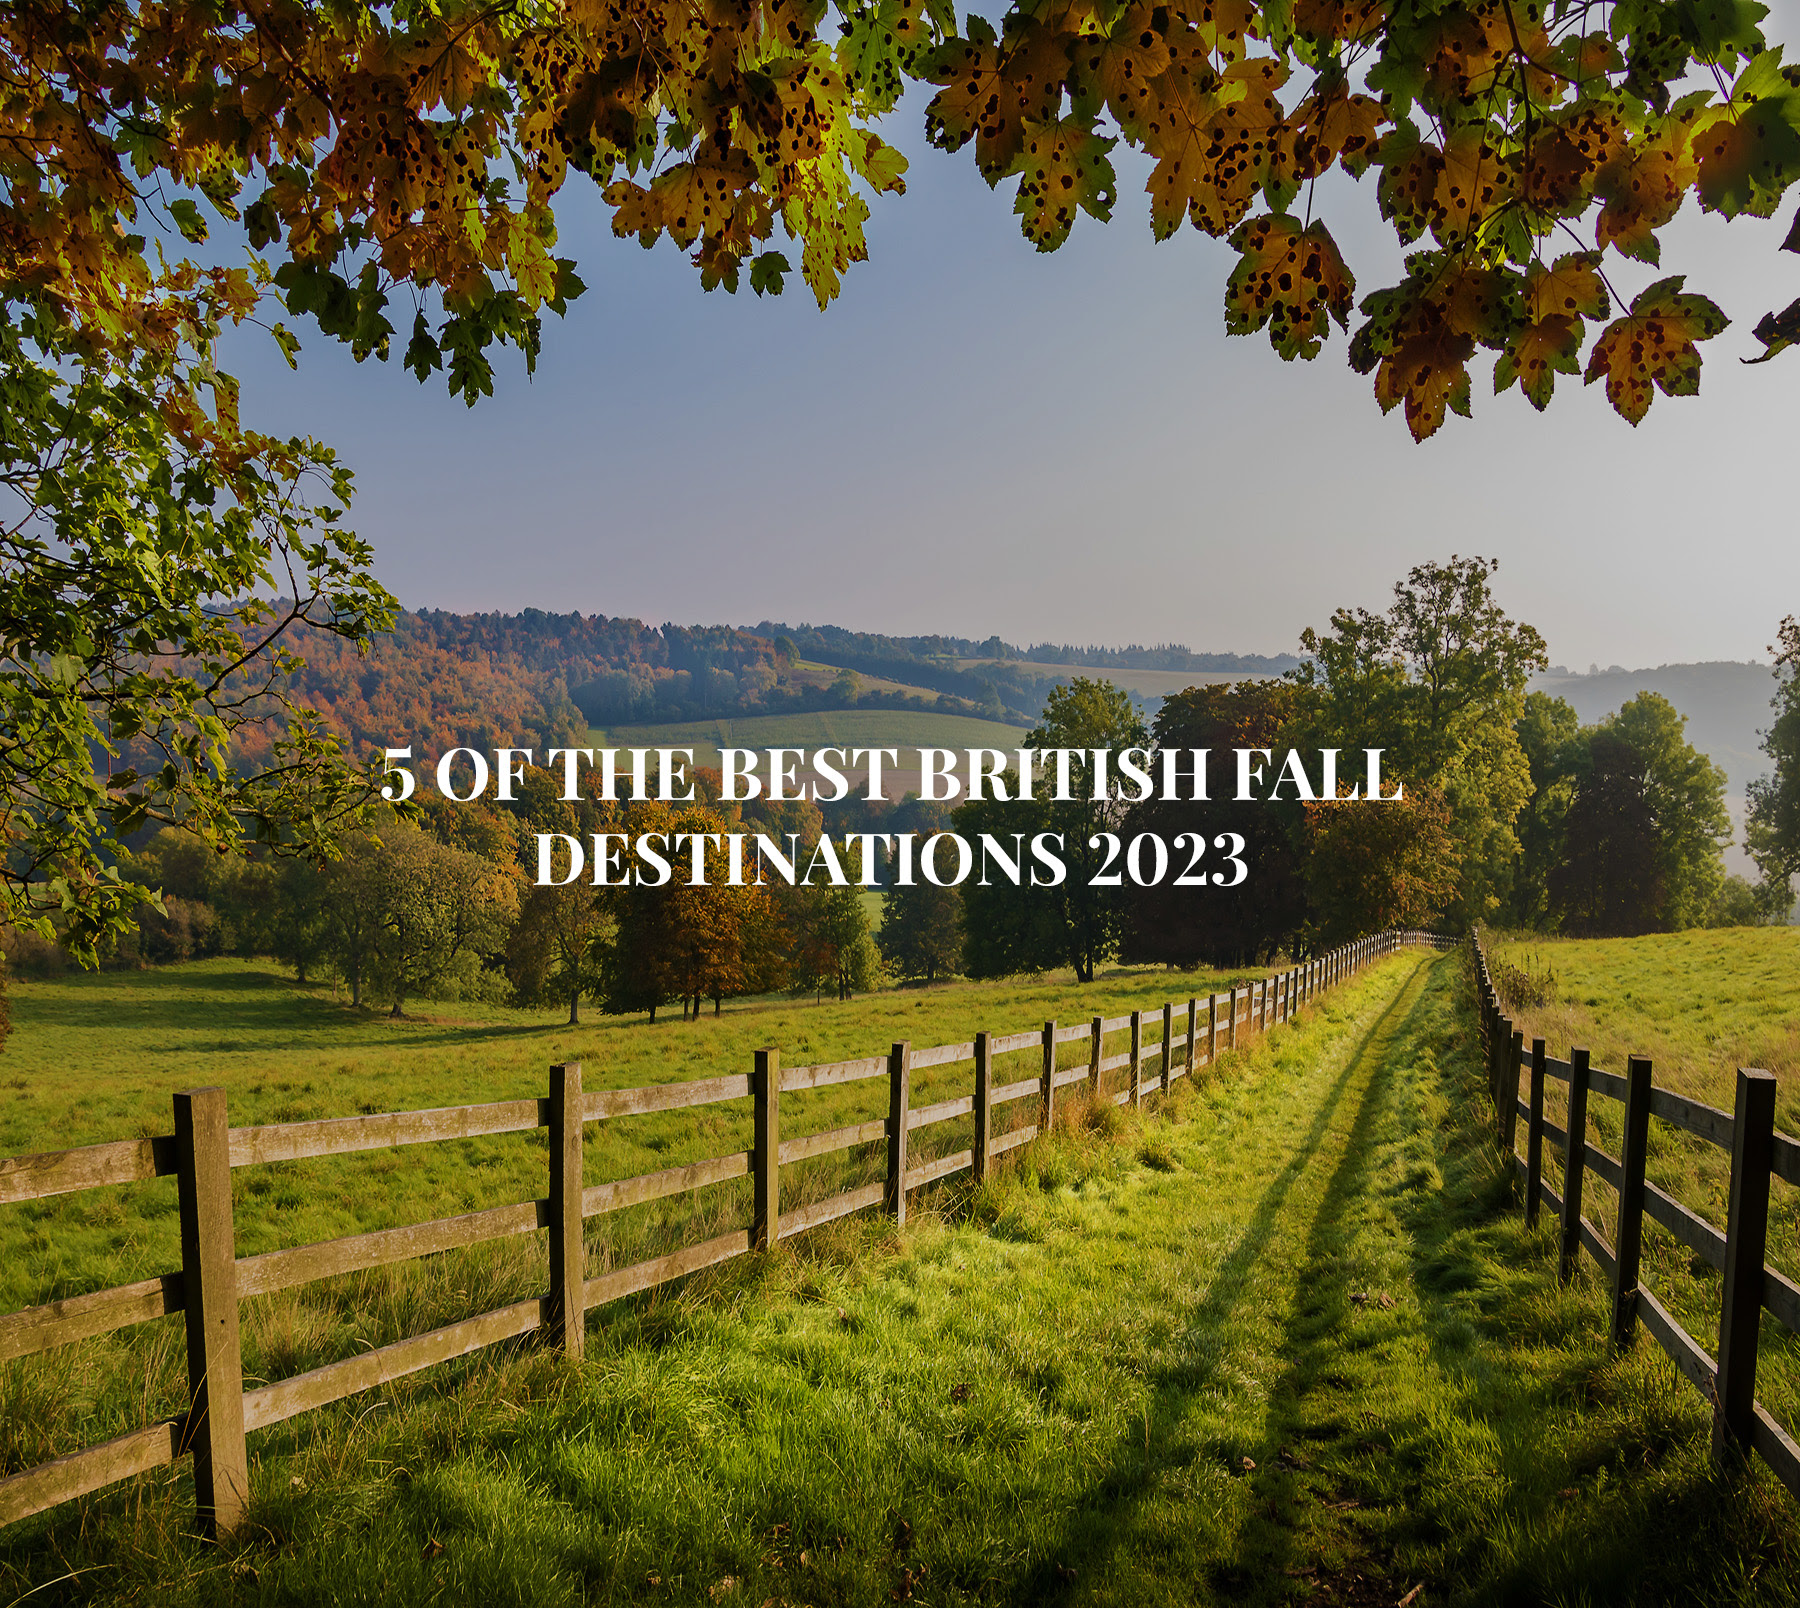 5 places to go to experience a British fall!